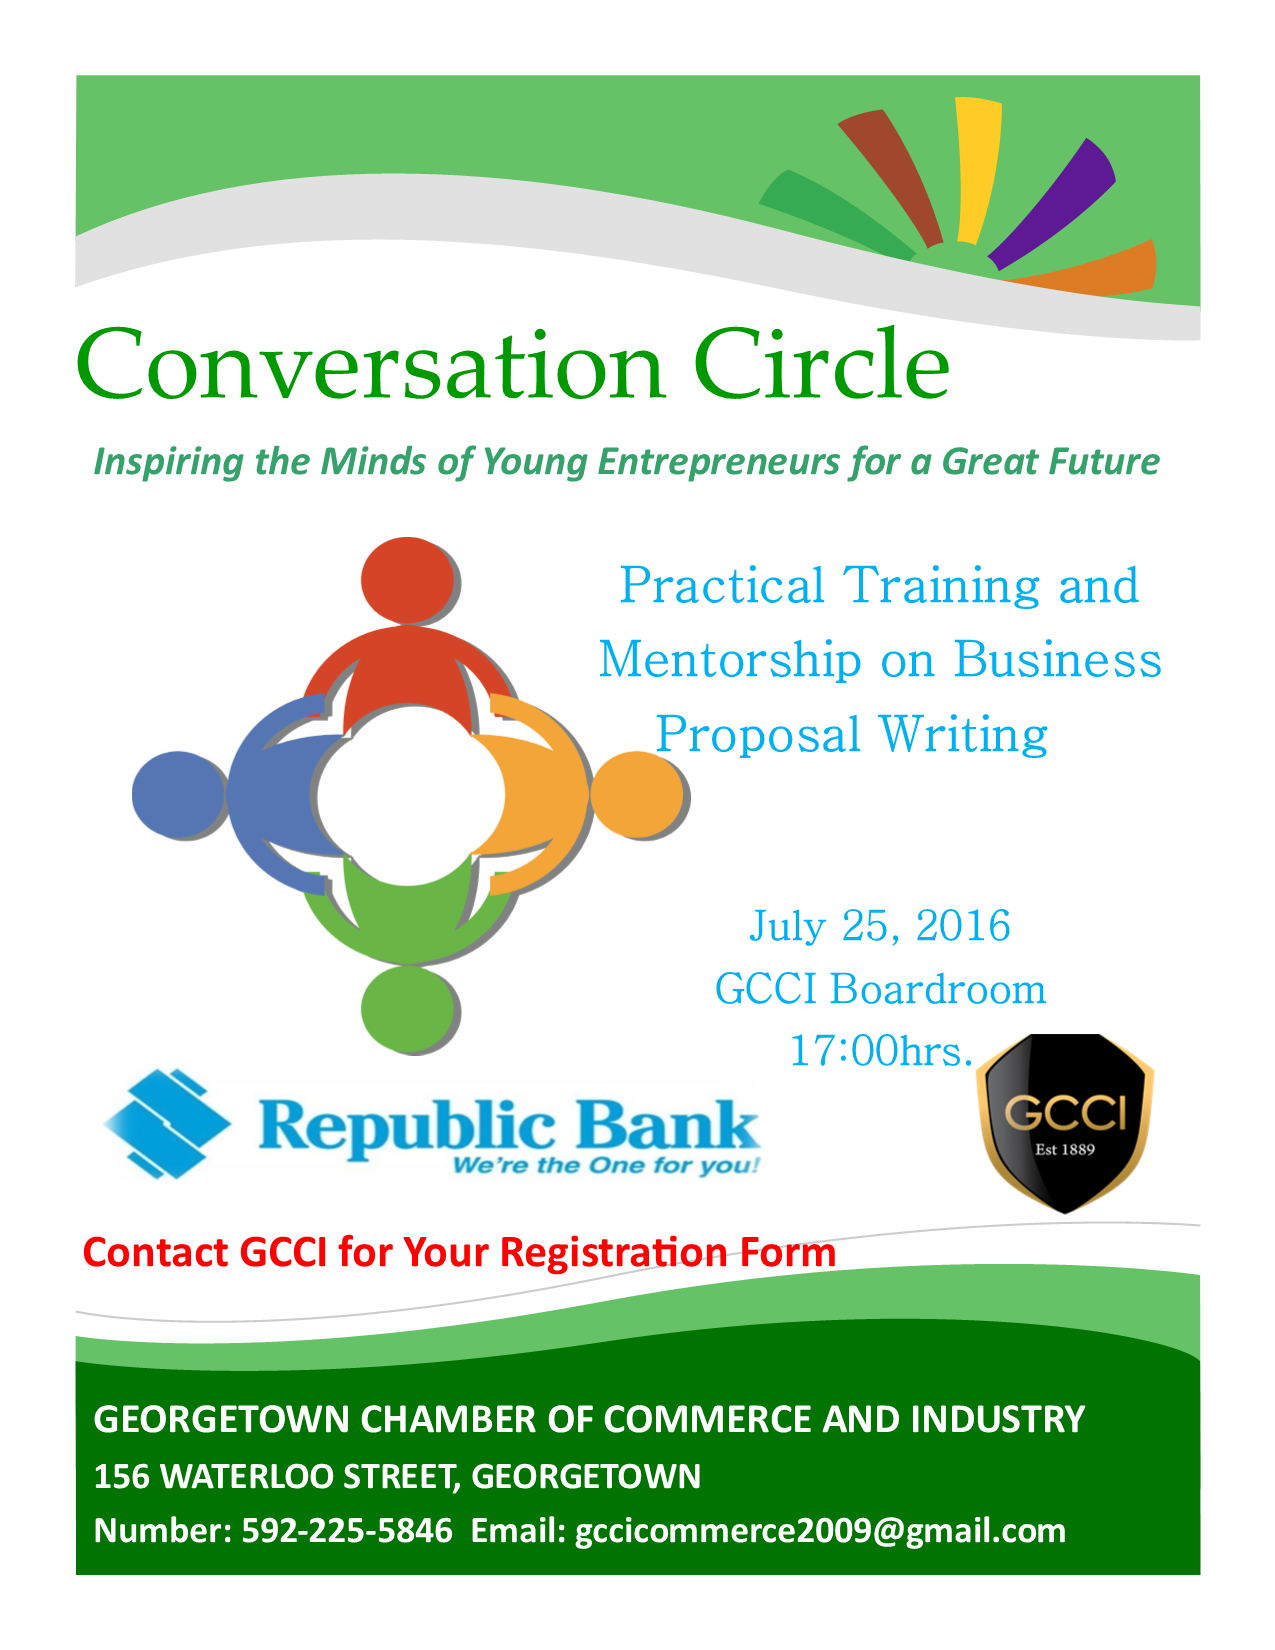 Register for GCCI’s Conversation Circle with Republic Bank